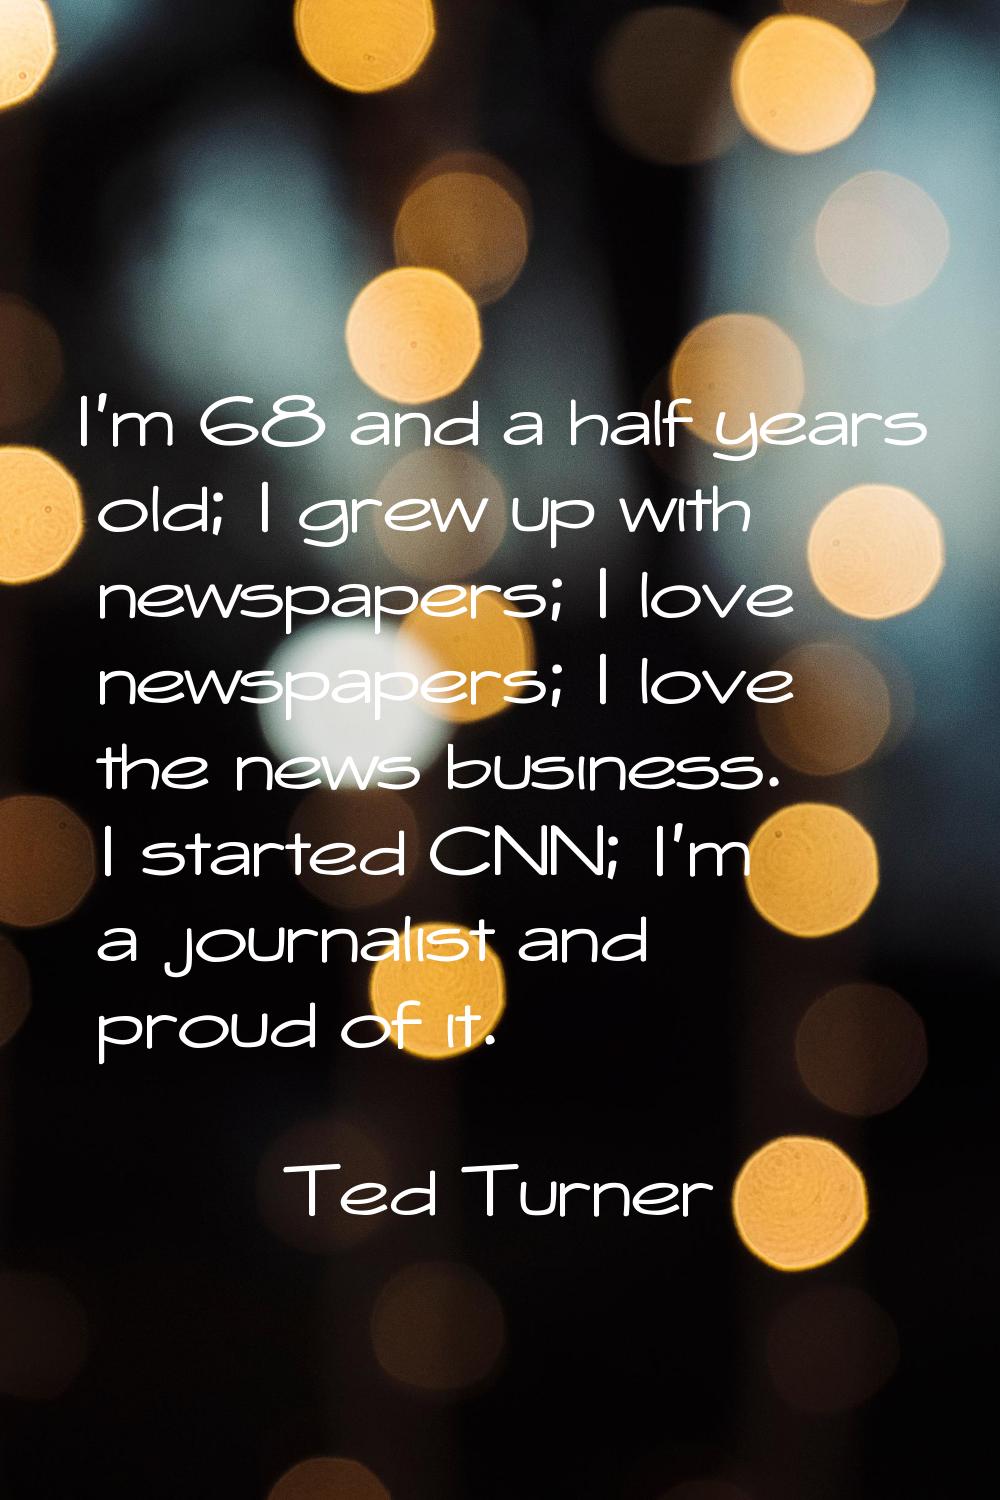 I'm 68 and a half years old; I grew up with newspapers; I love newspapers; I love the news business